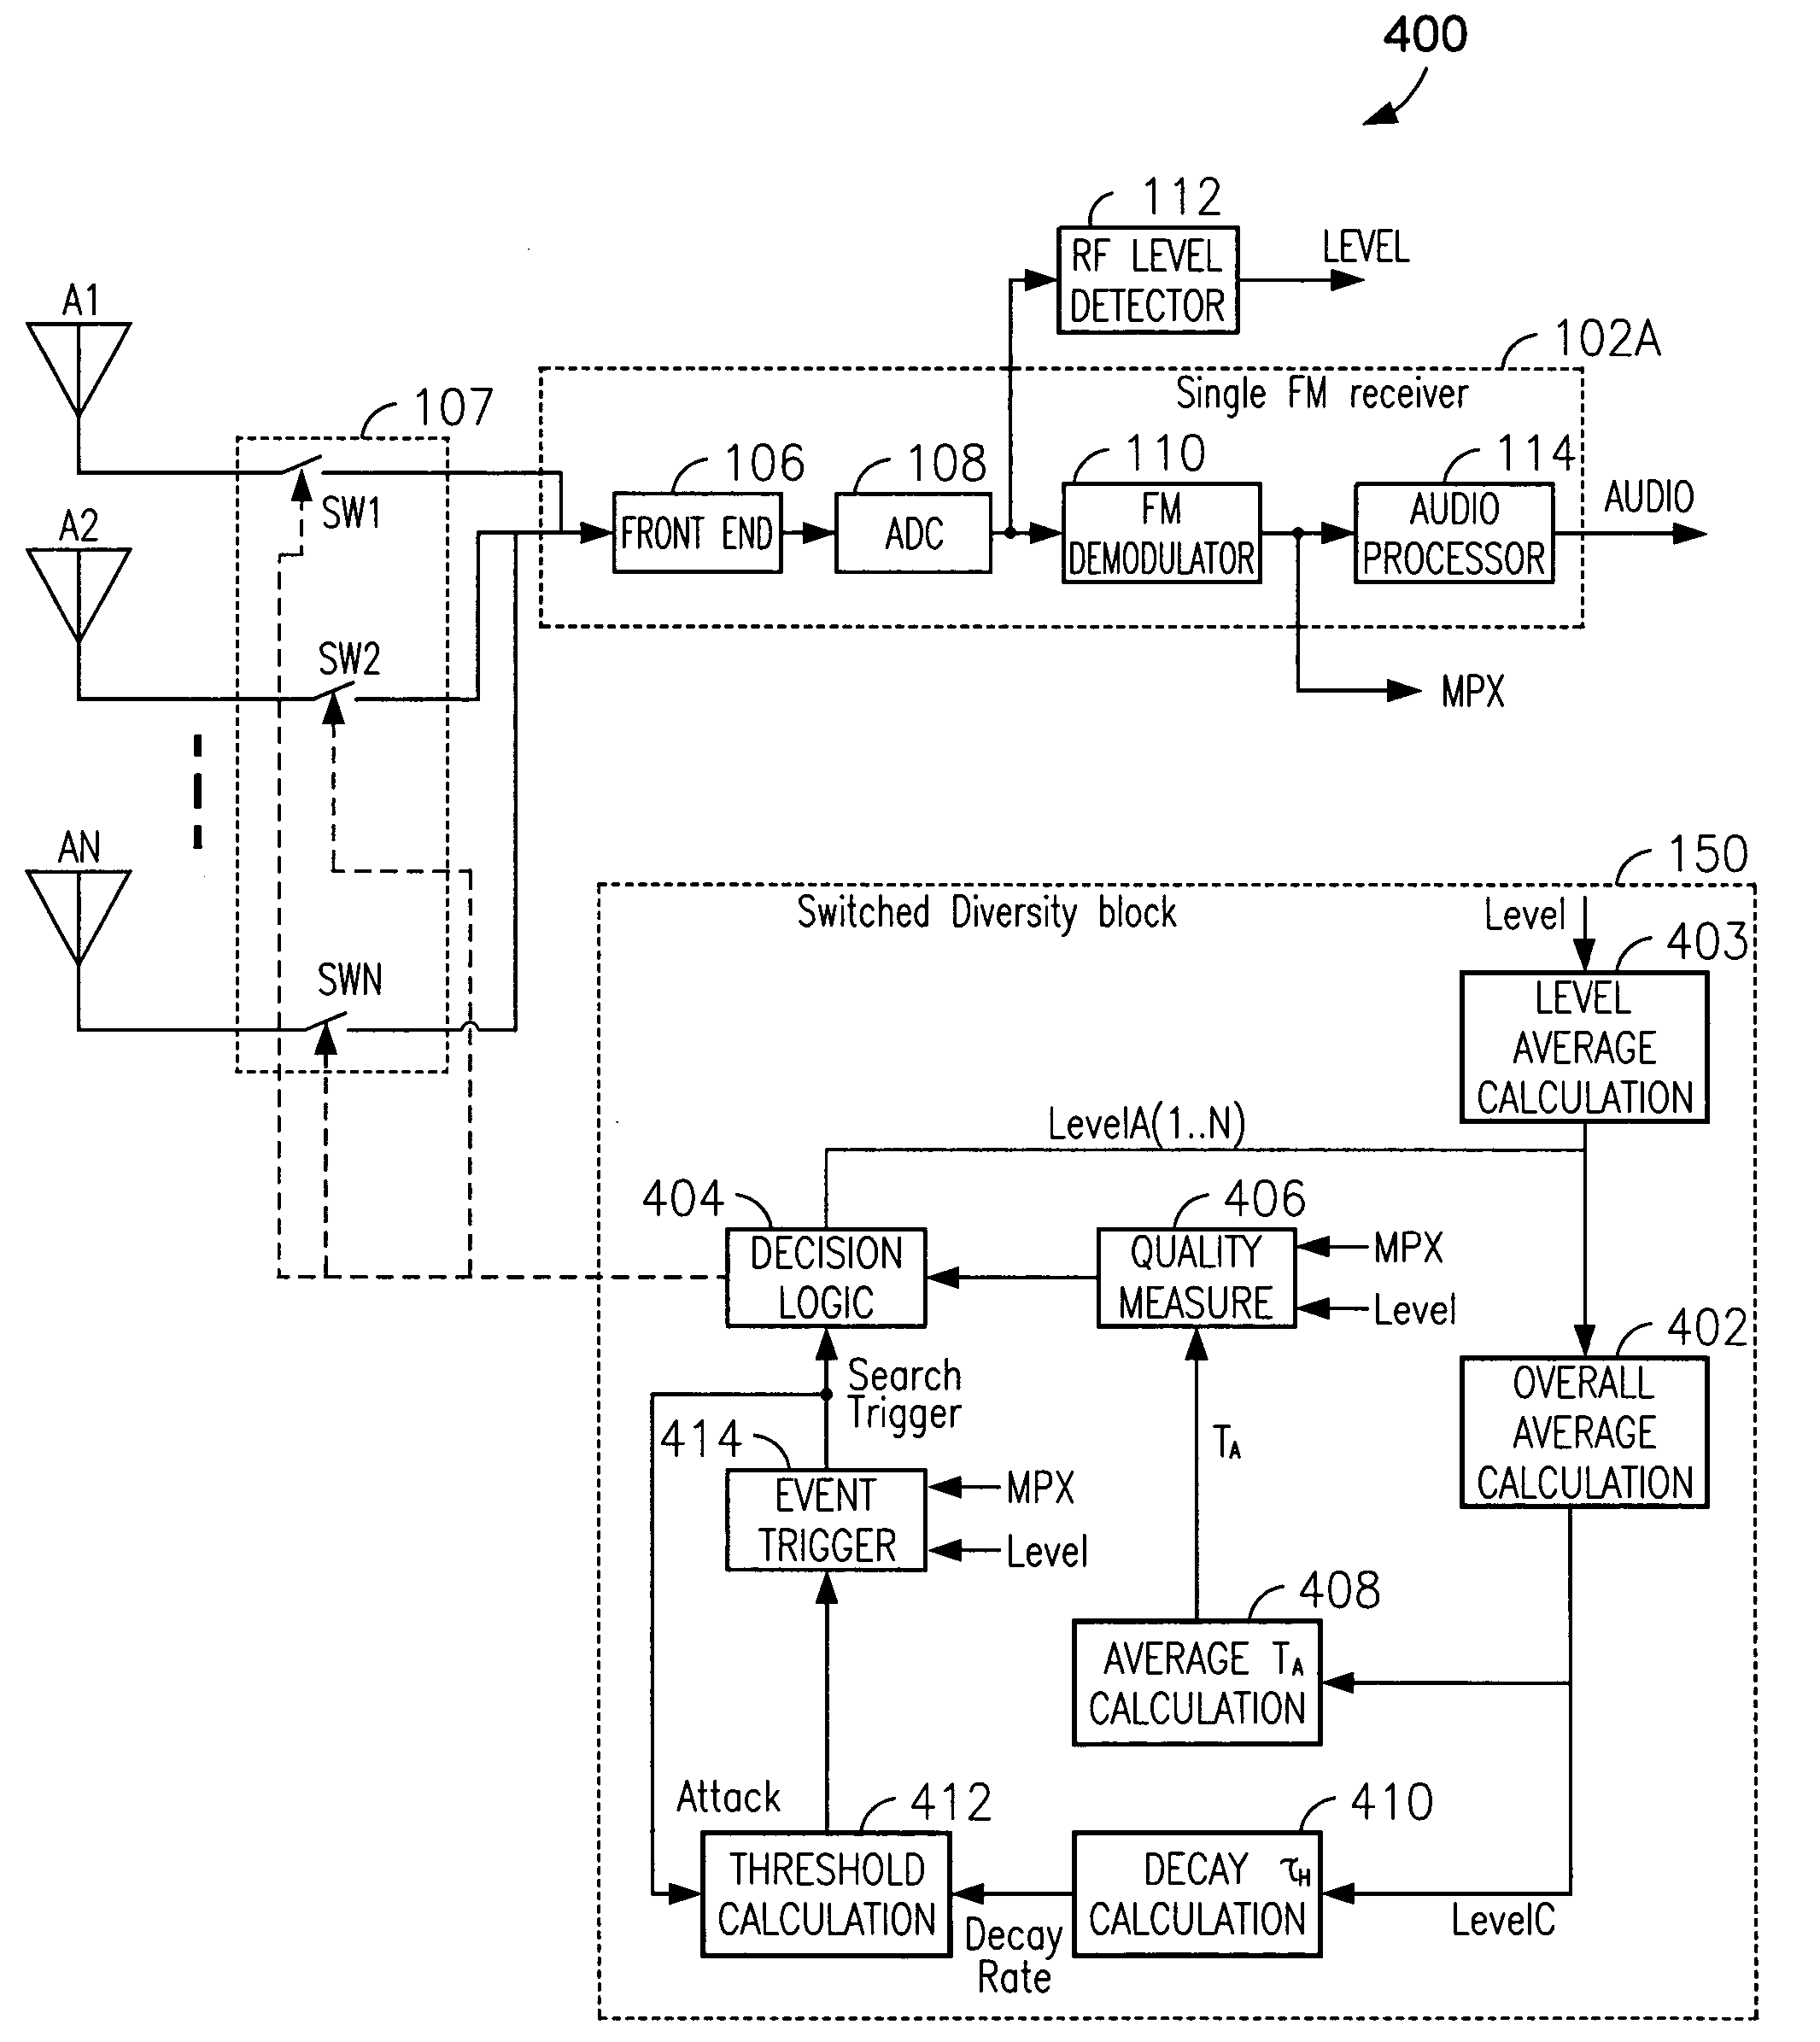 Technique for reducing multipath interference in an FM receiver